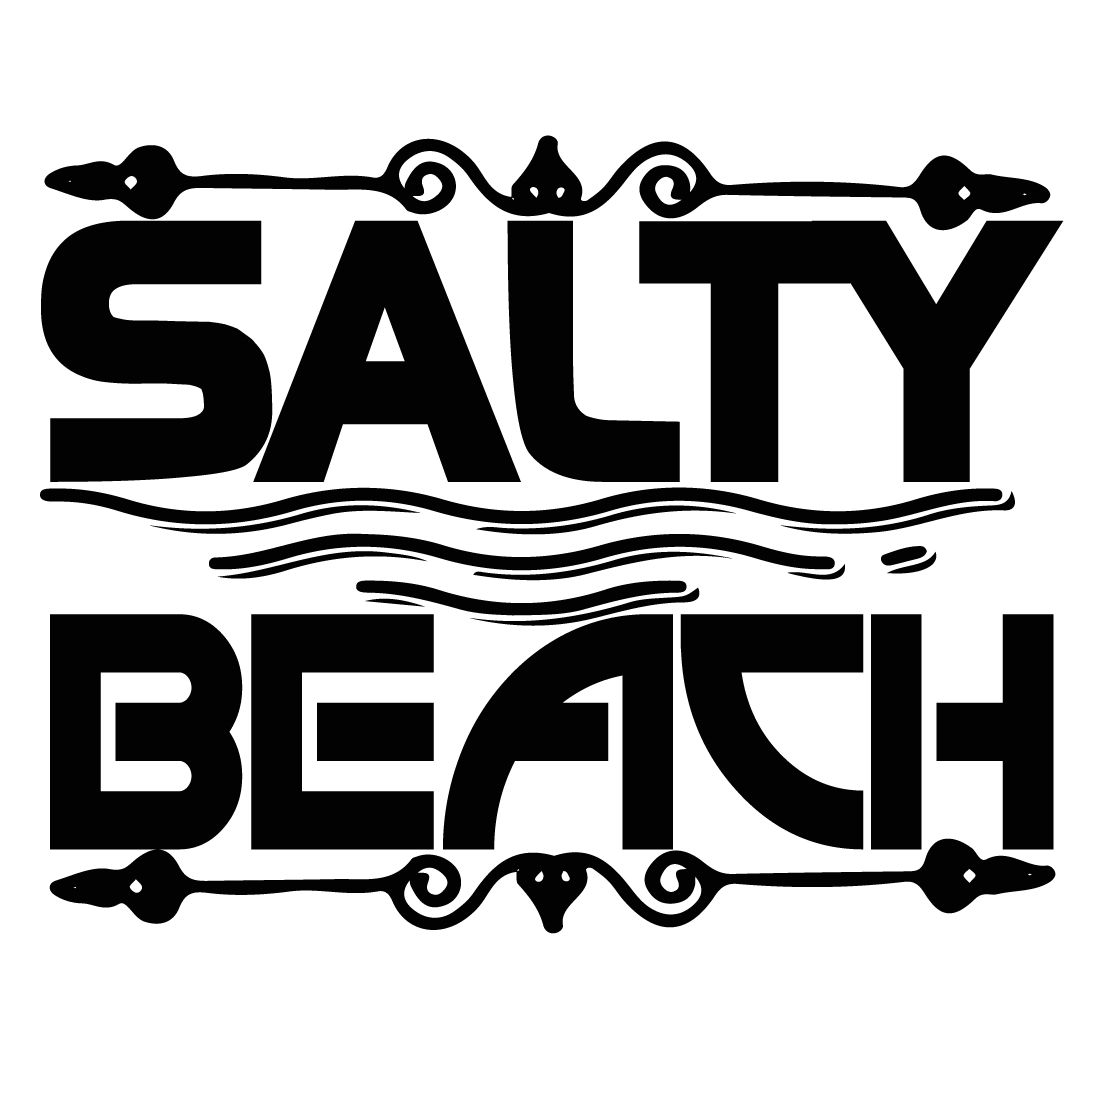 Salty beach preview image.